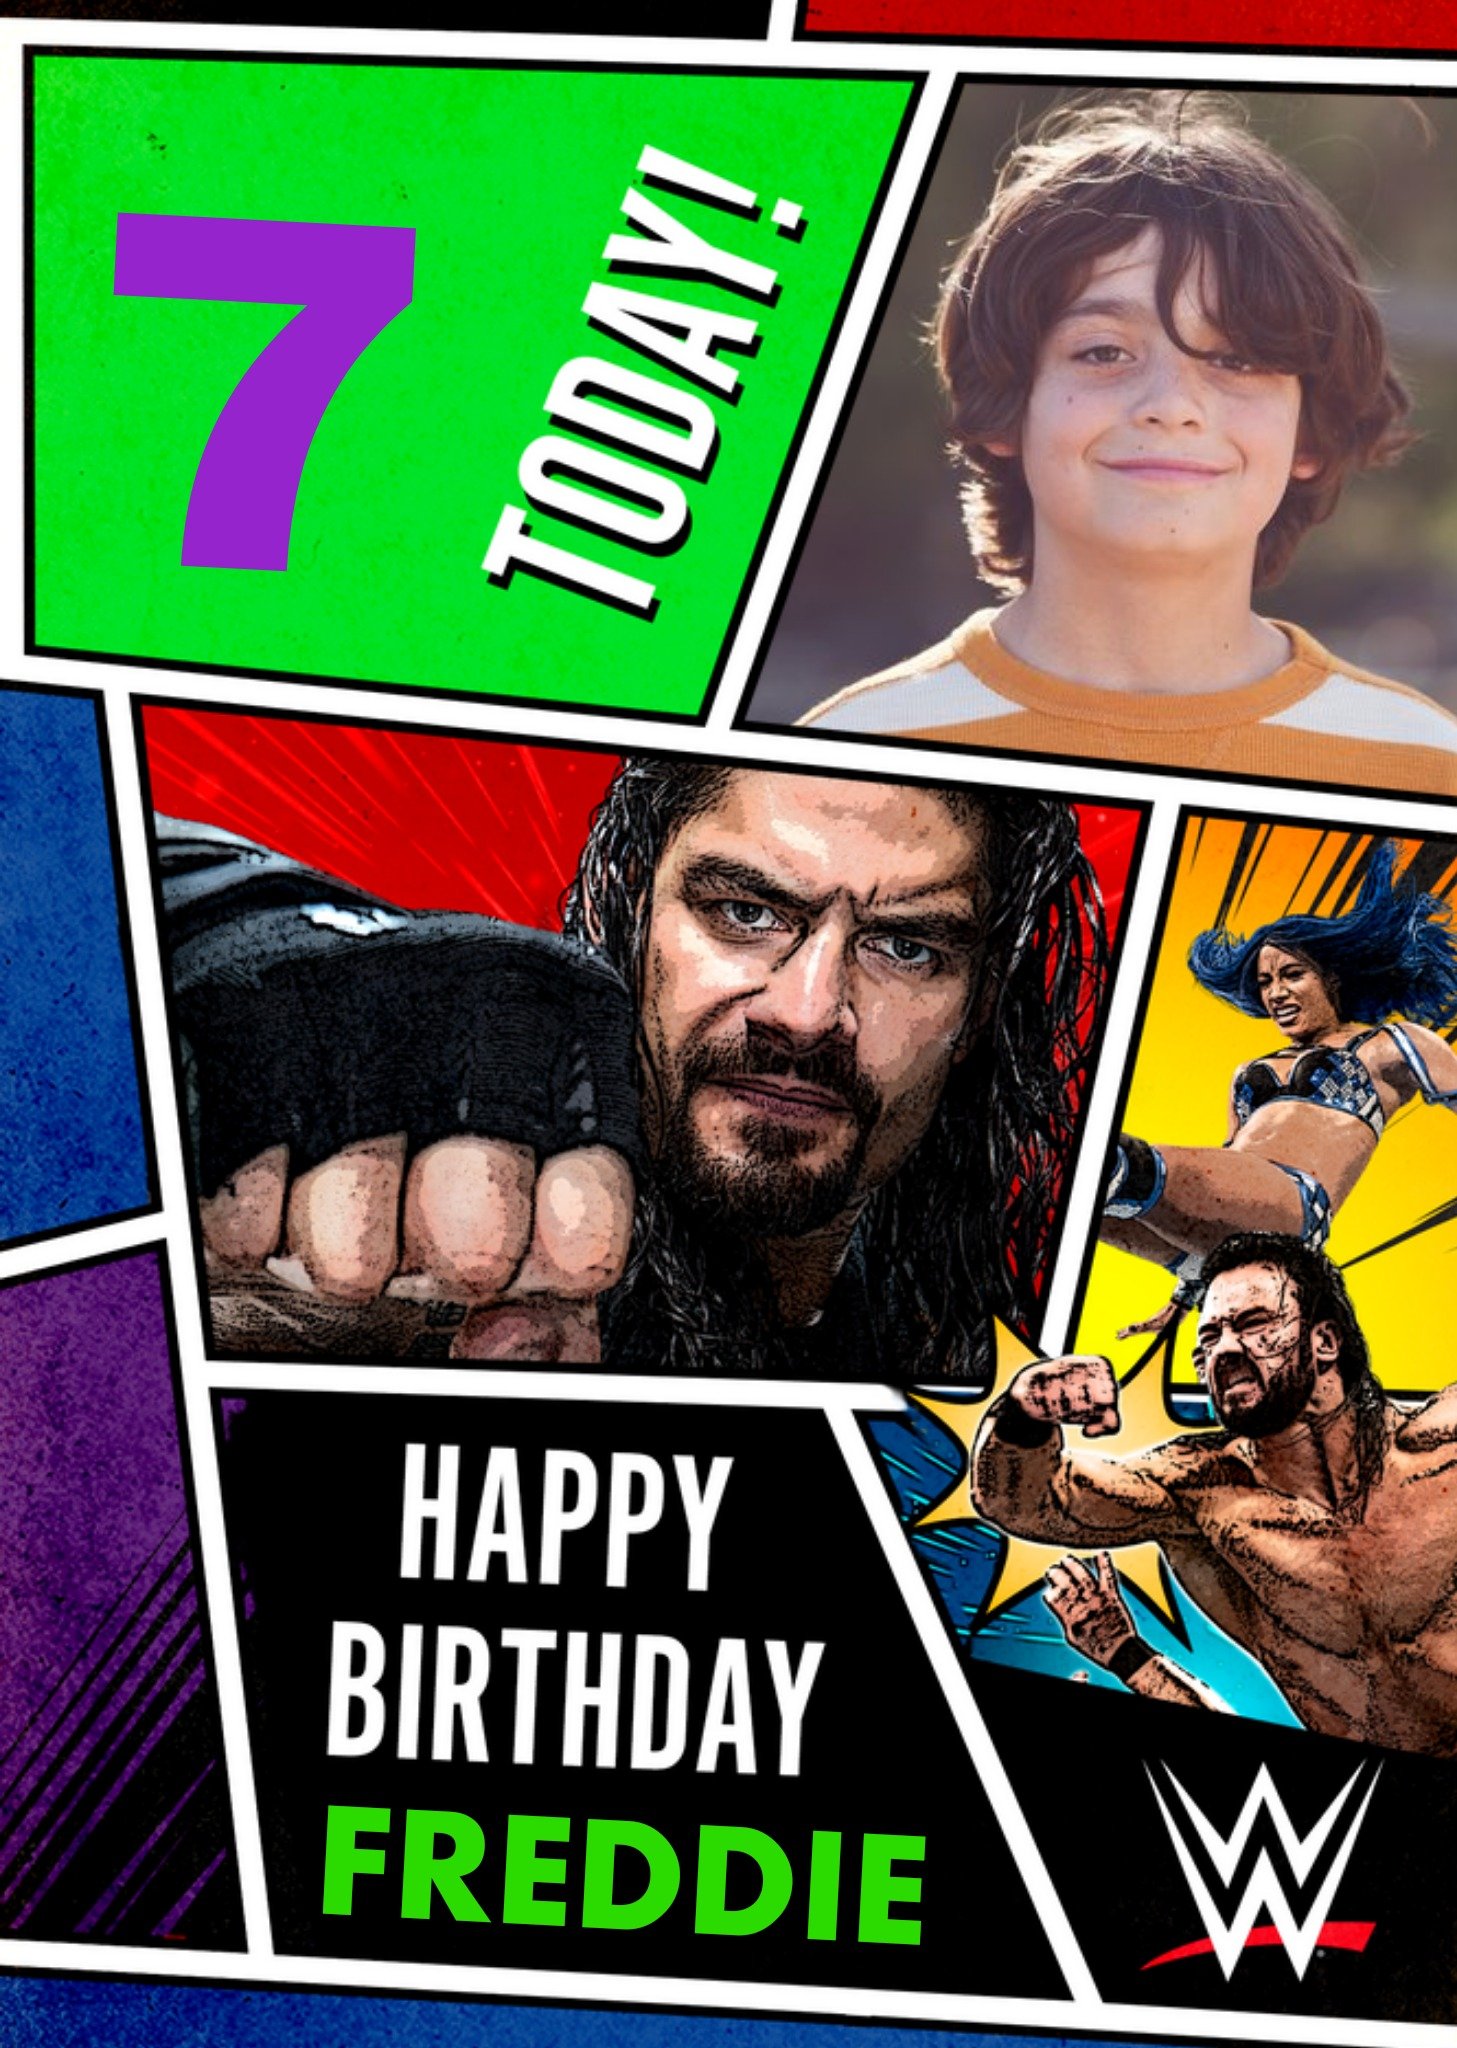 Wwe Characters 7 Today Photo Upload Birthday Card, Large